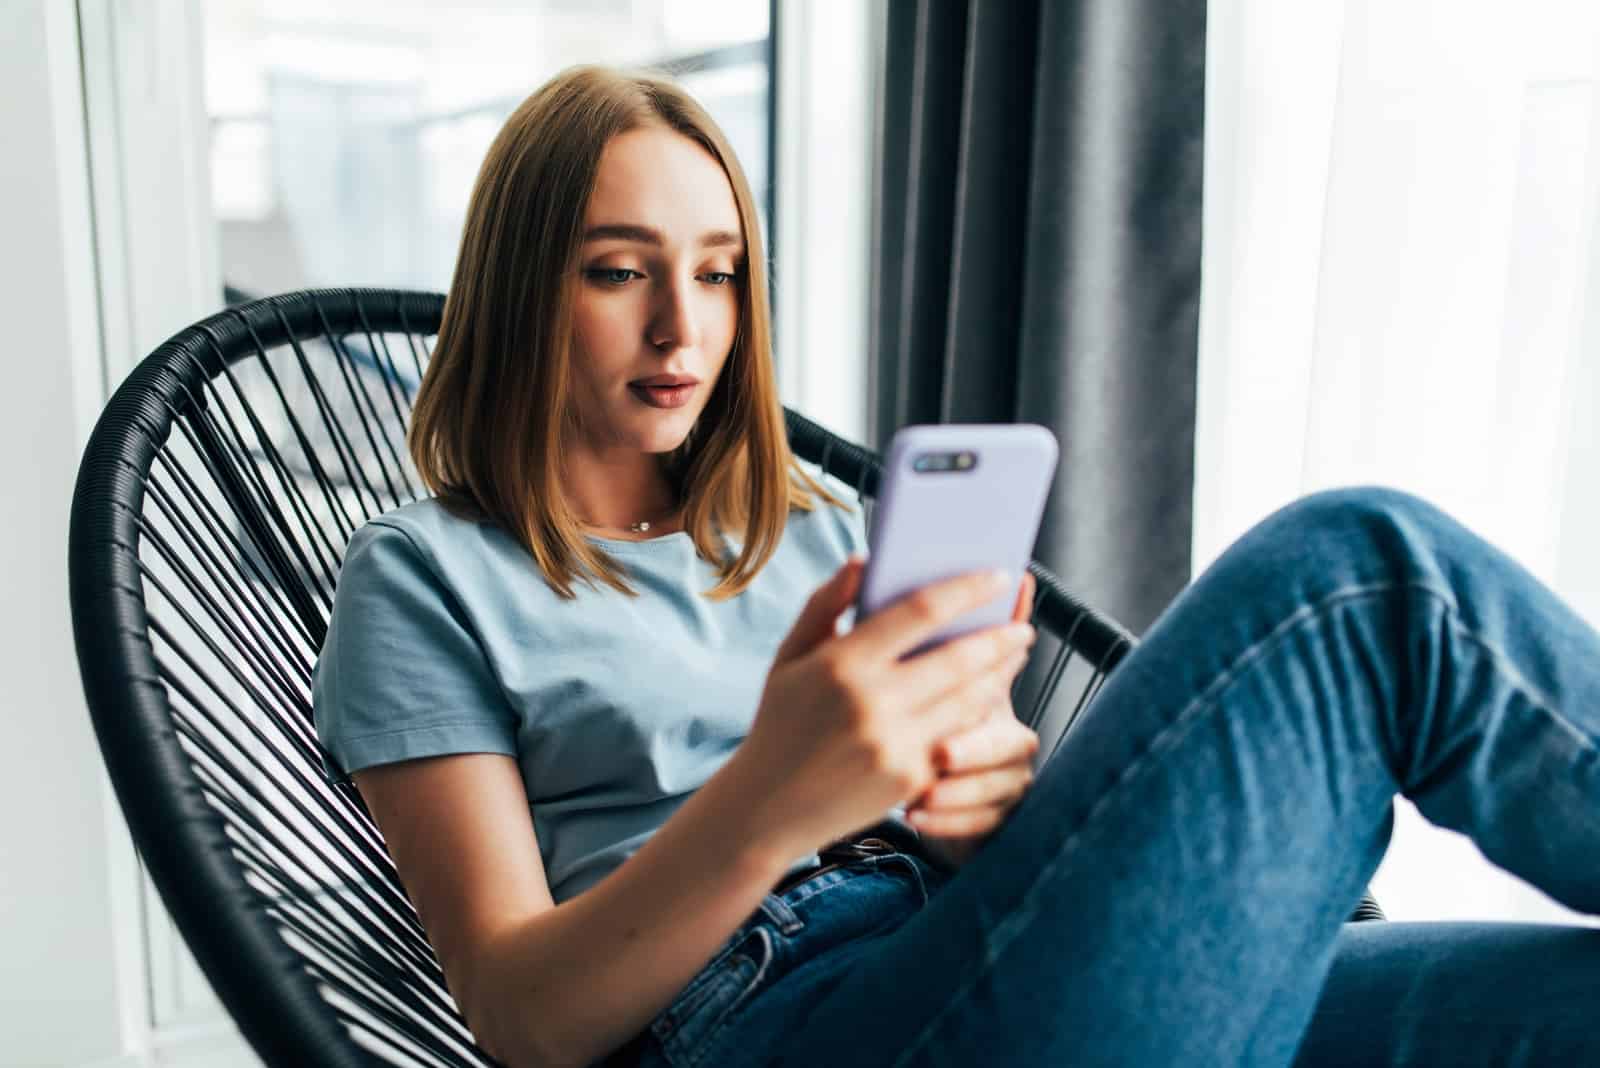 woman in blue shirt using smartphone while sitting on sofa